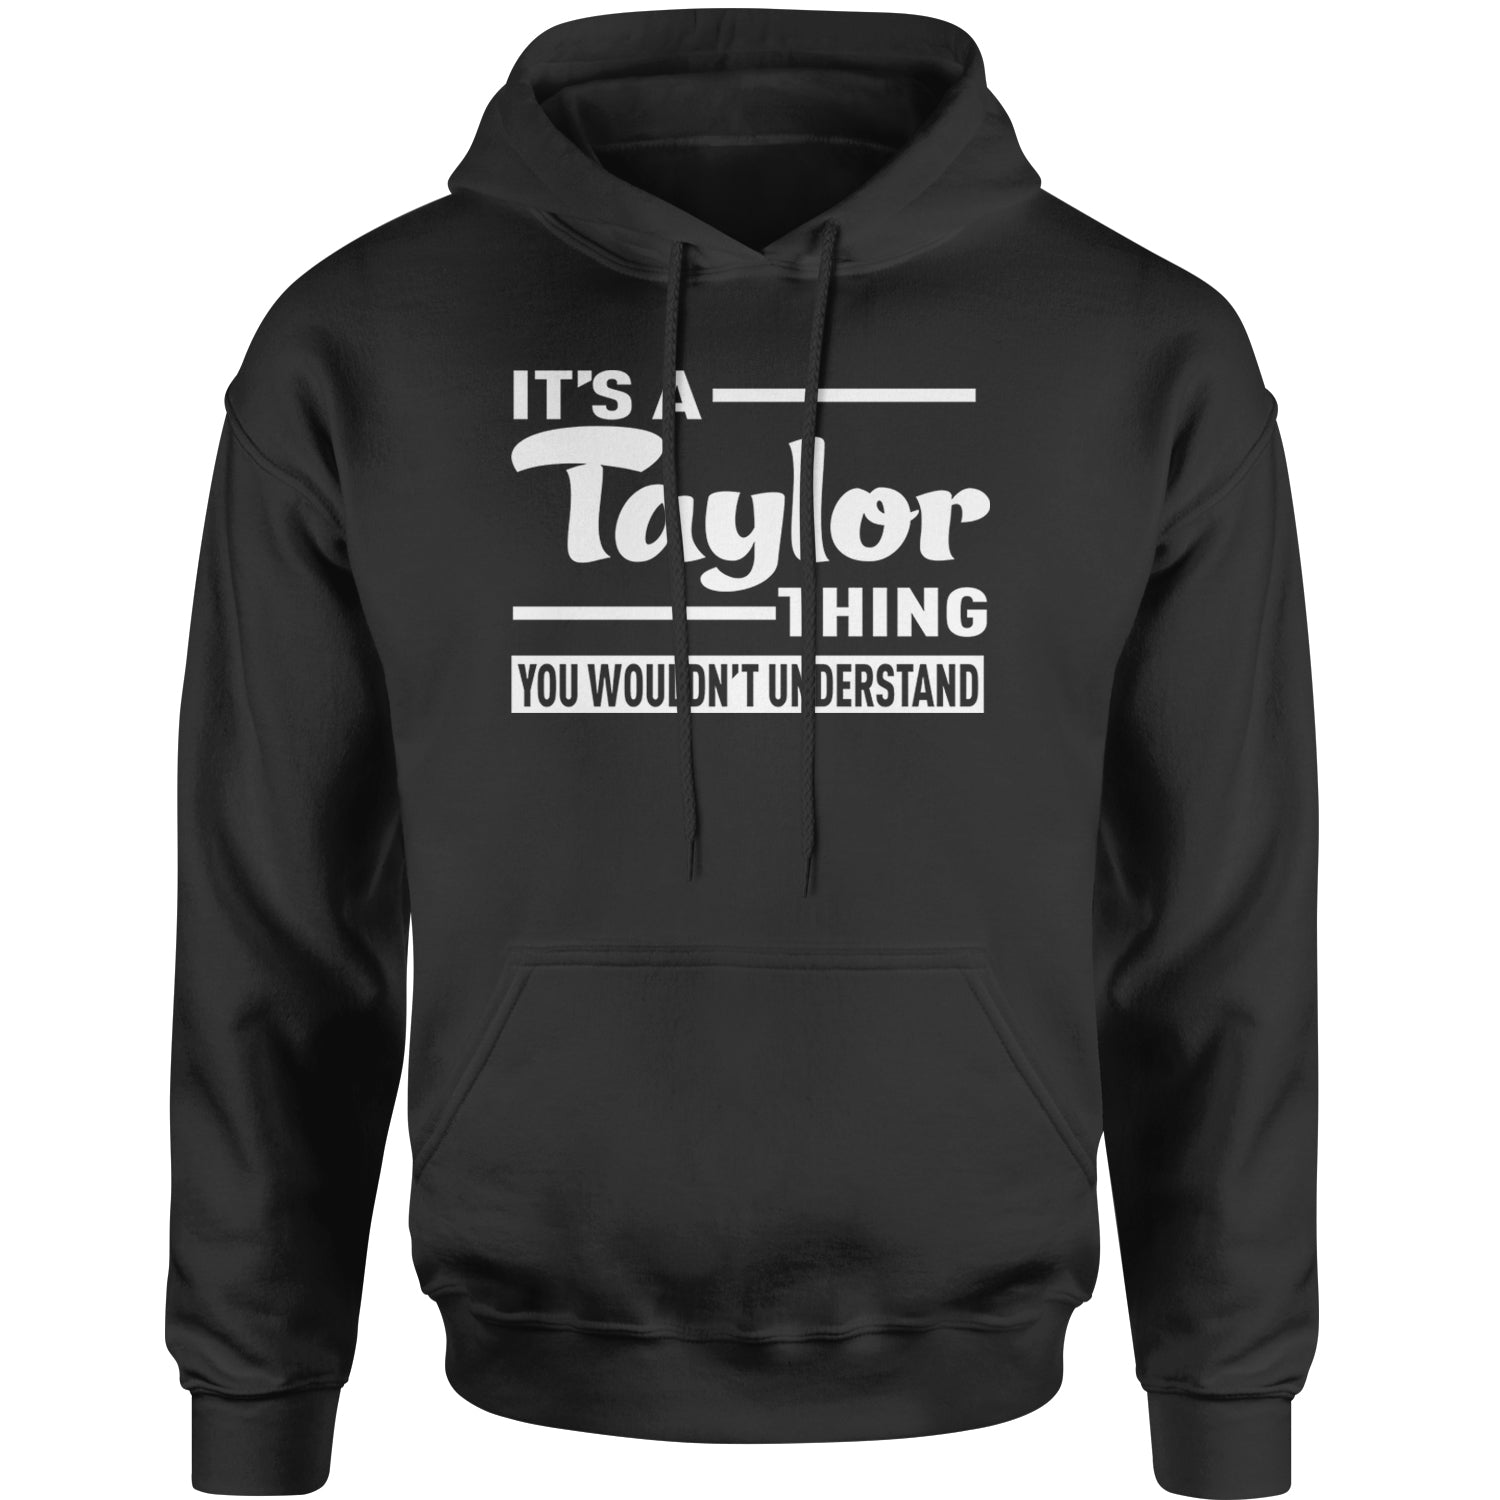 It's A Taylor Thing, You Wouldn't Understand TTPD Adult Hoodie Sweatshirt